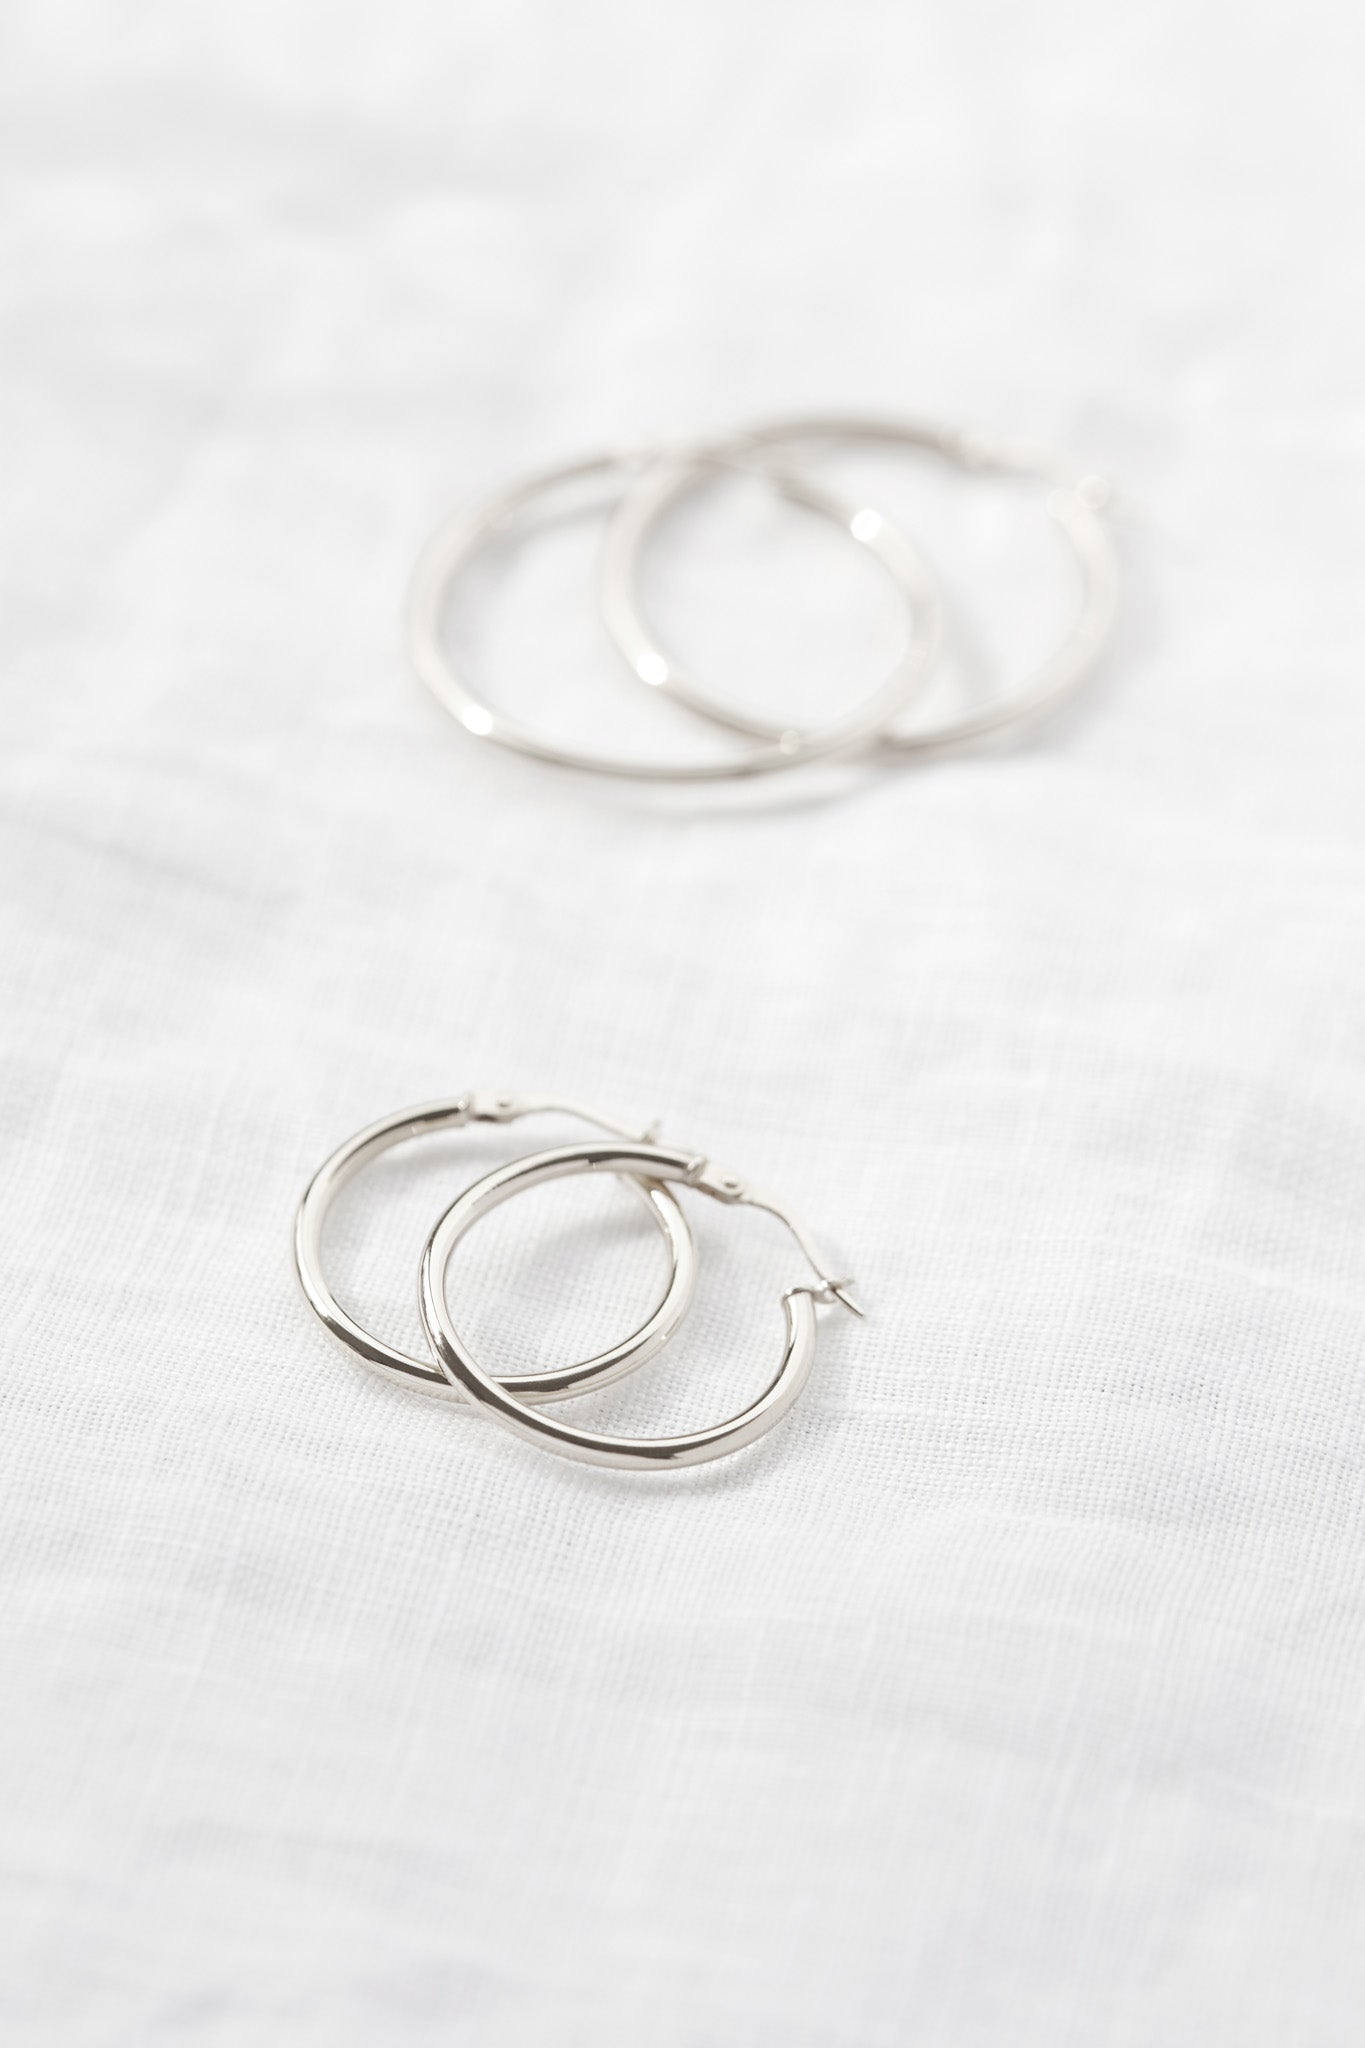 9ct Gold 20mm Hoops in White Gold